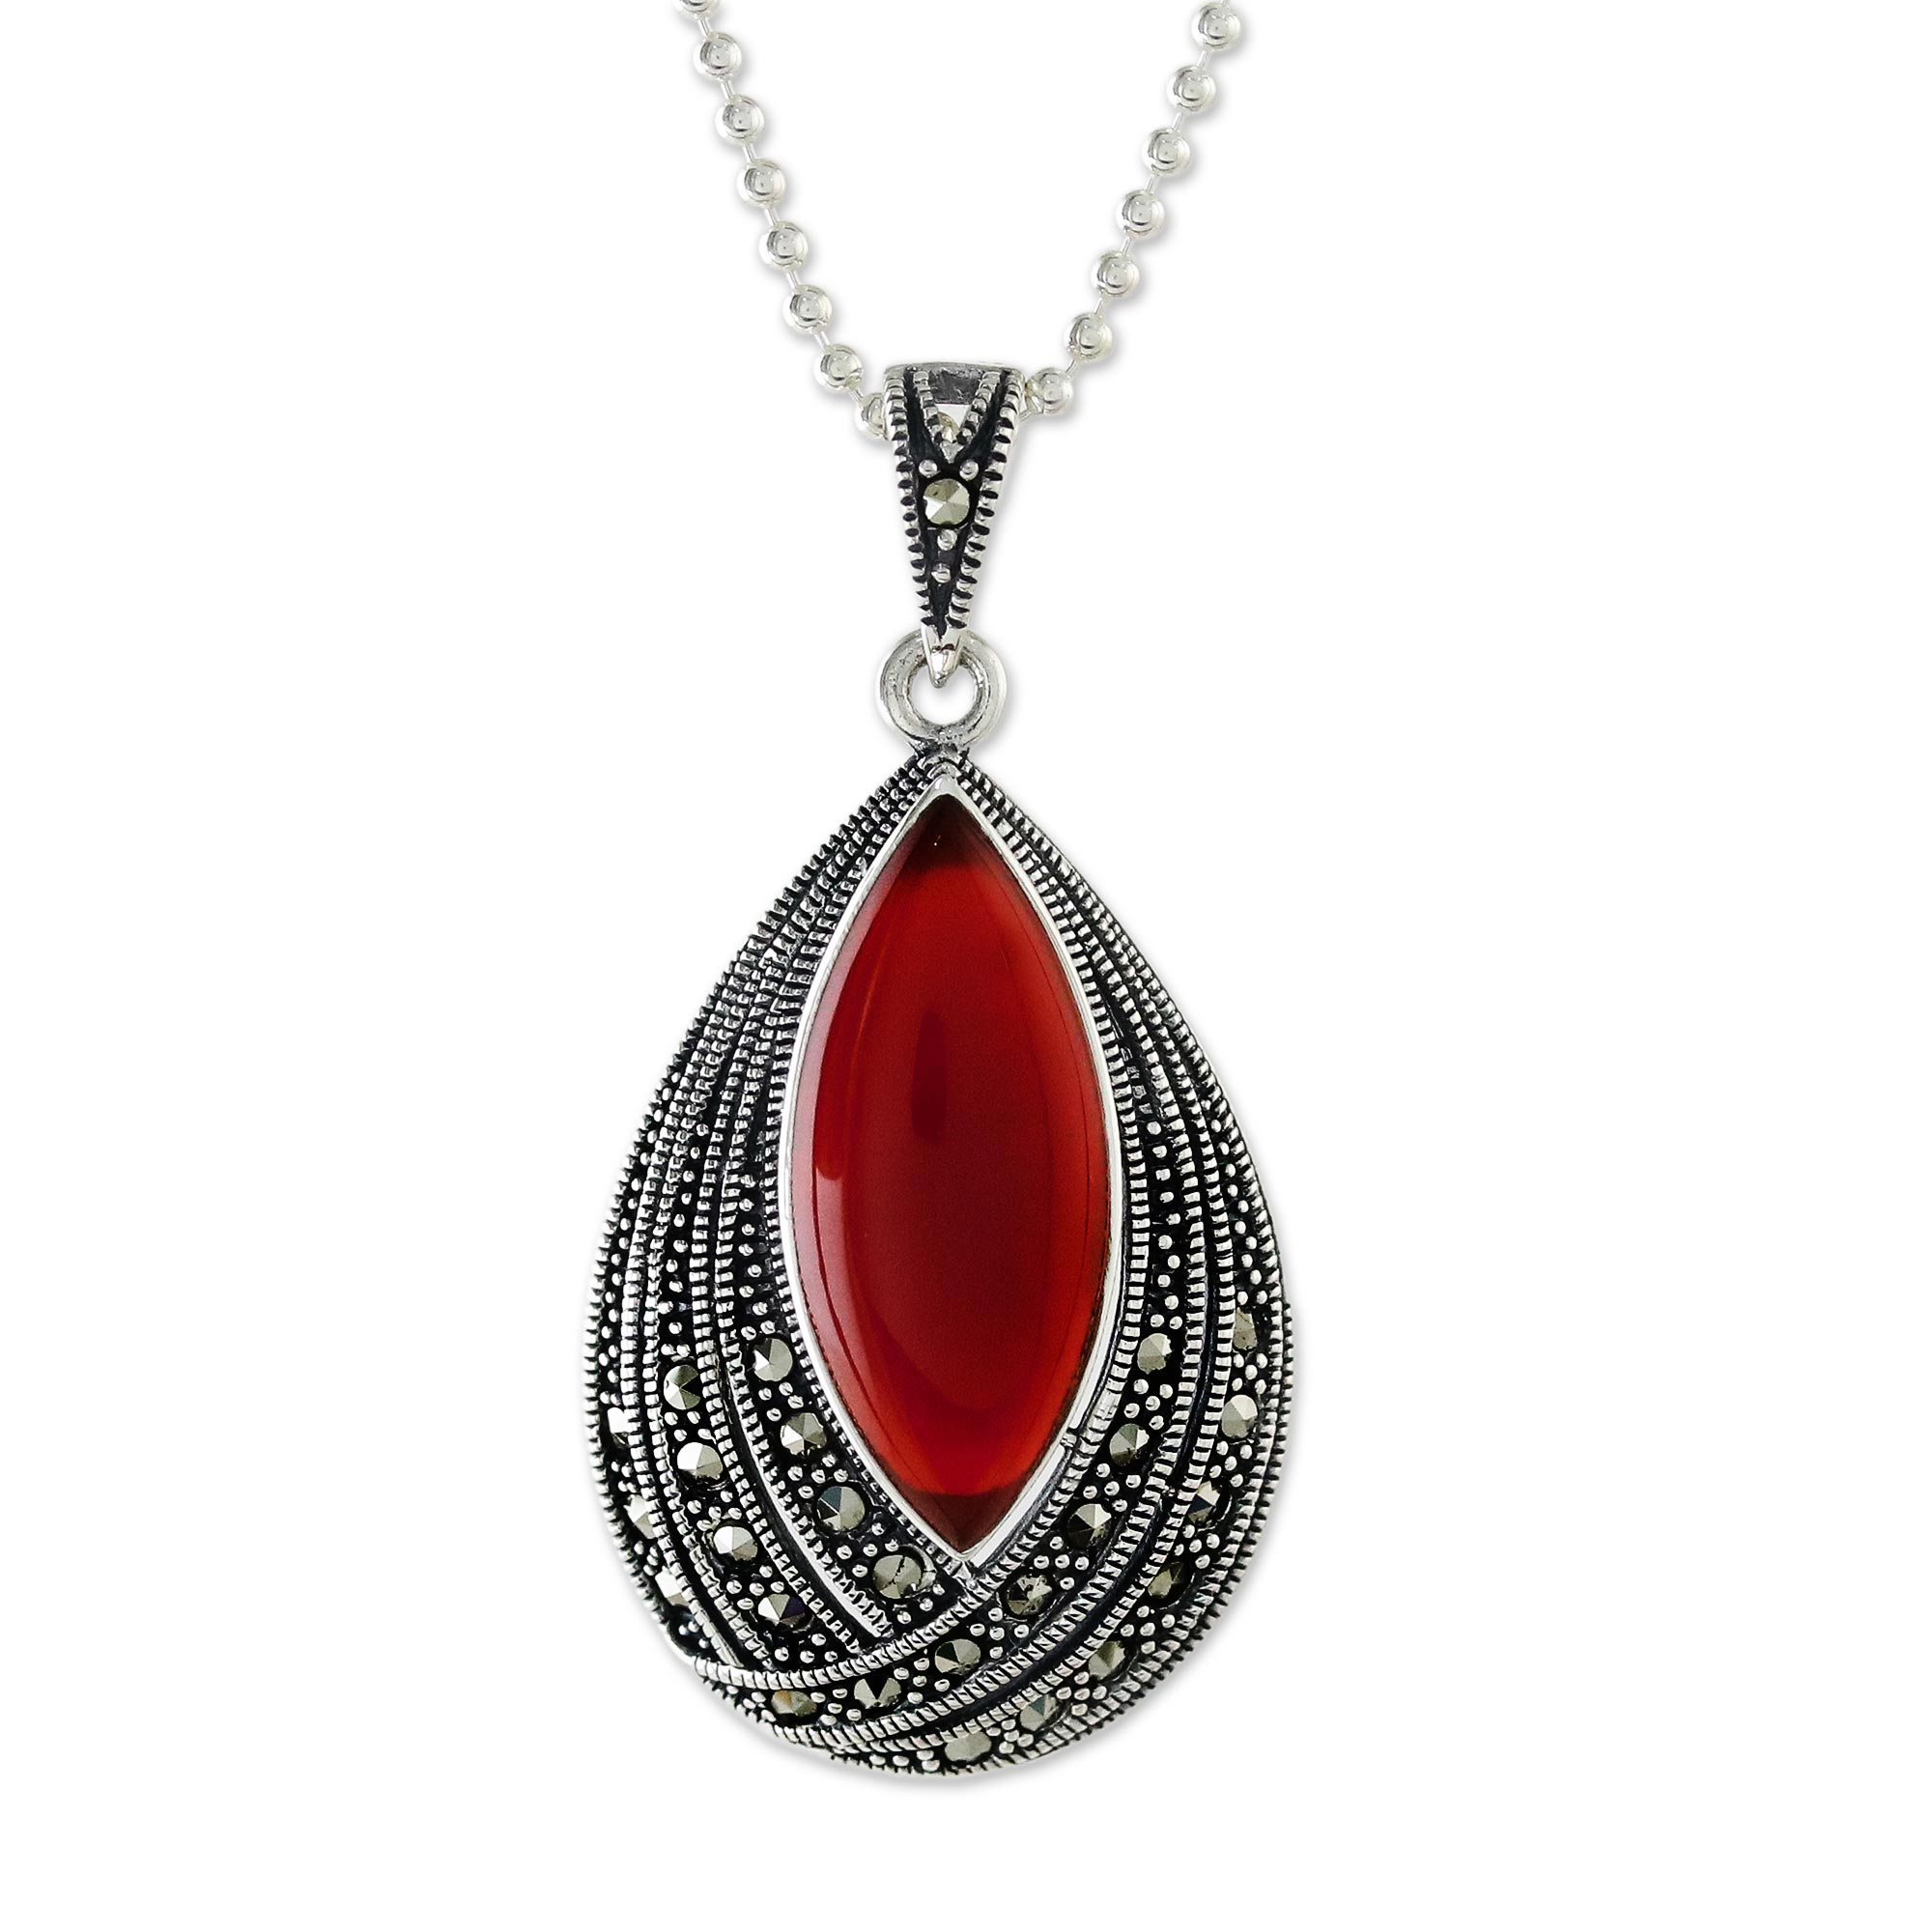 UNICEF Market | Red Onyx Pendant Necklace from Thailand - Scarlet Dance